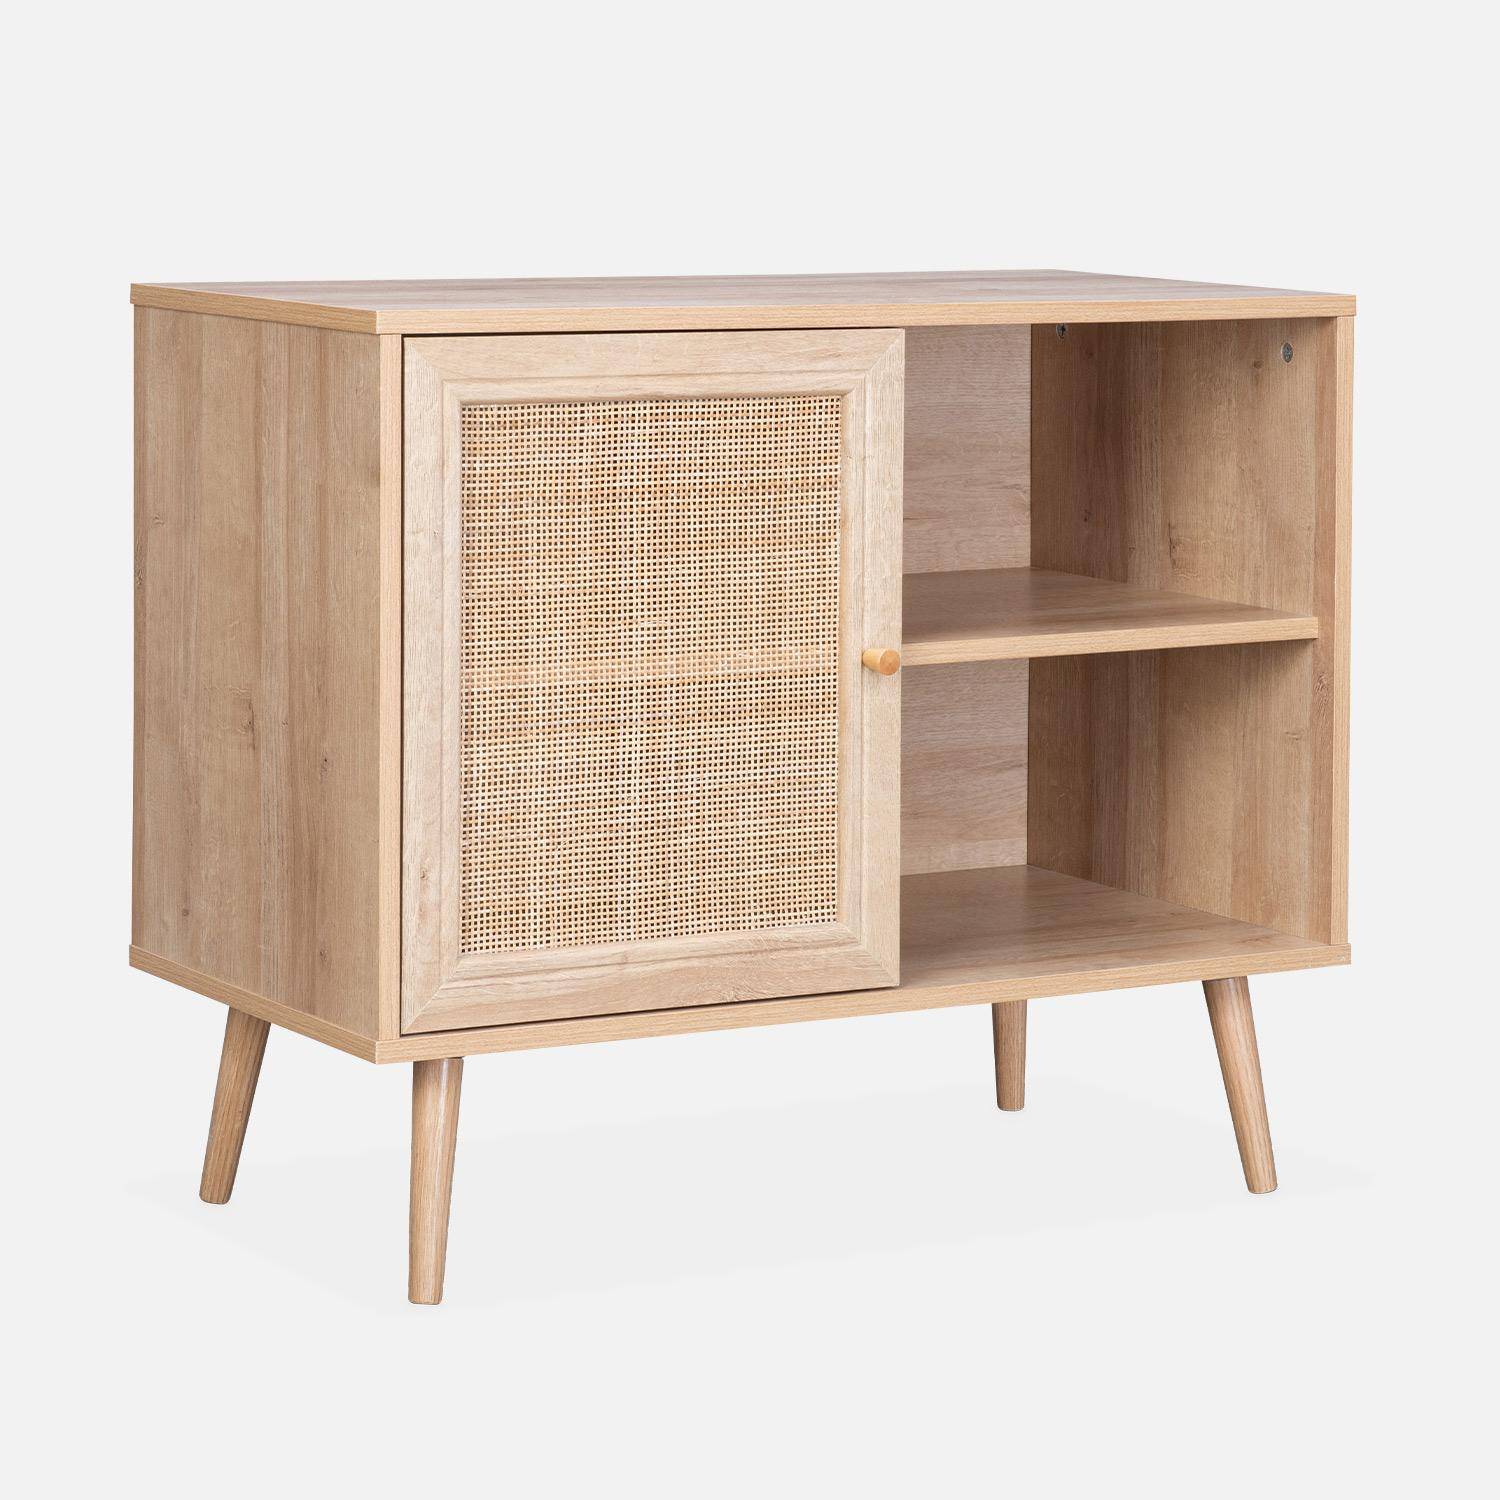 Wooden and cane rattan detail storage cabinet with 2 shelves, 1 cupboard, Scandi-style legs, 80x39x65.8cm - Boheme - Natural wood colour Photo3